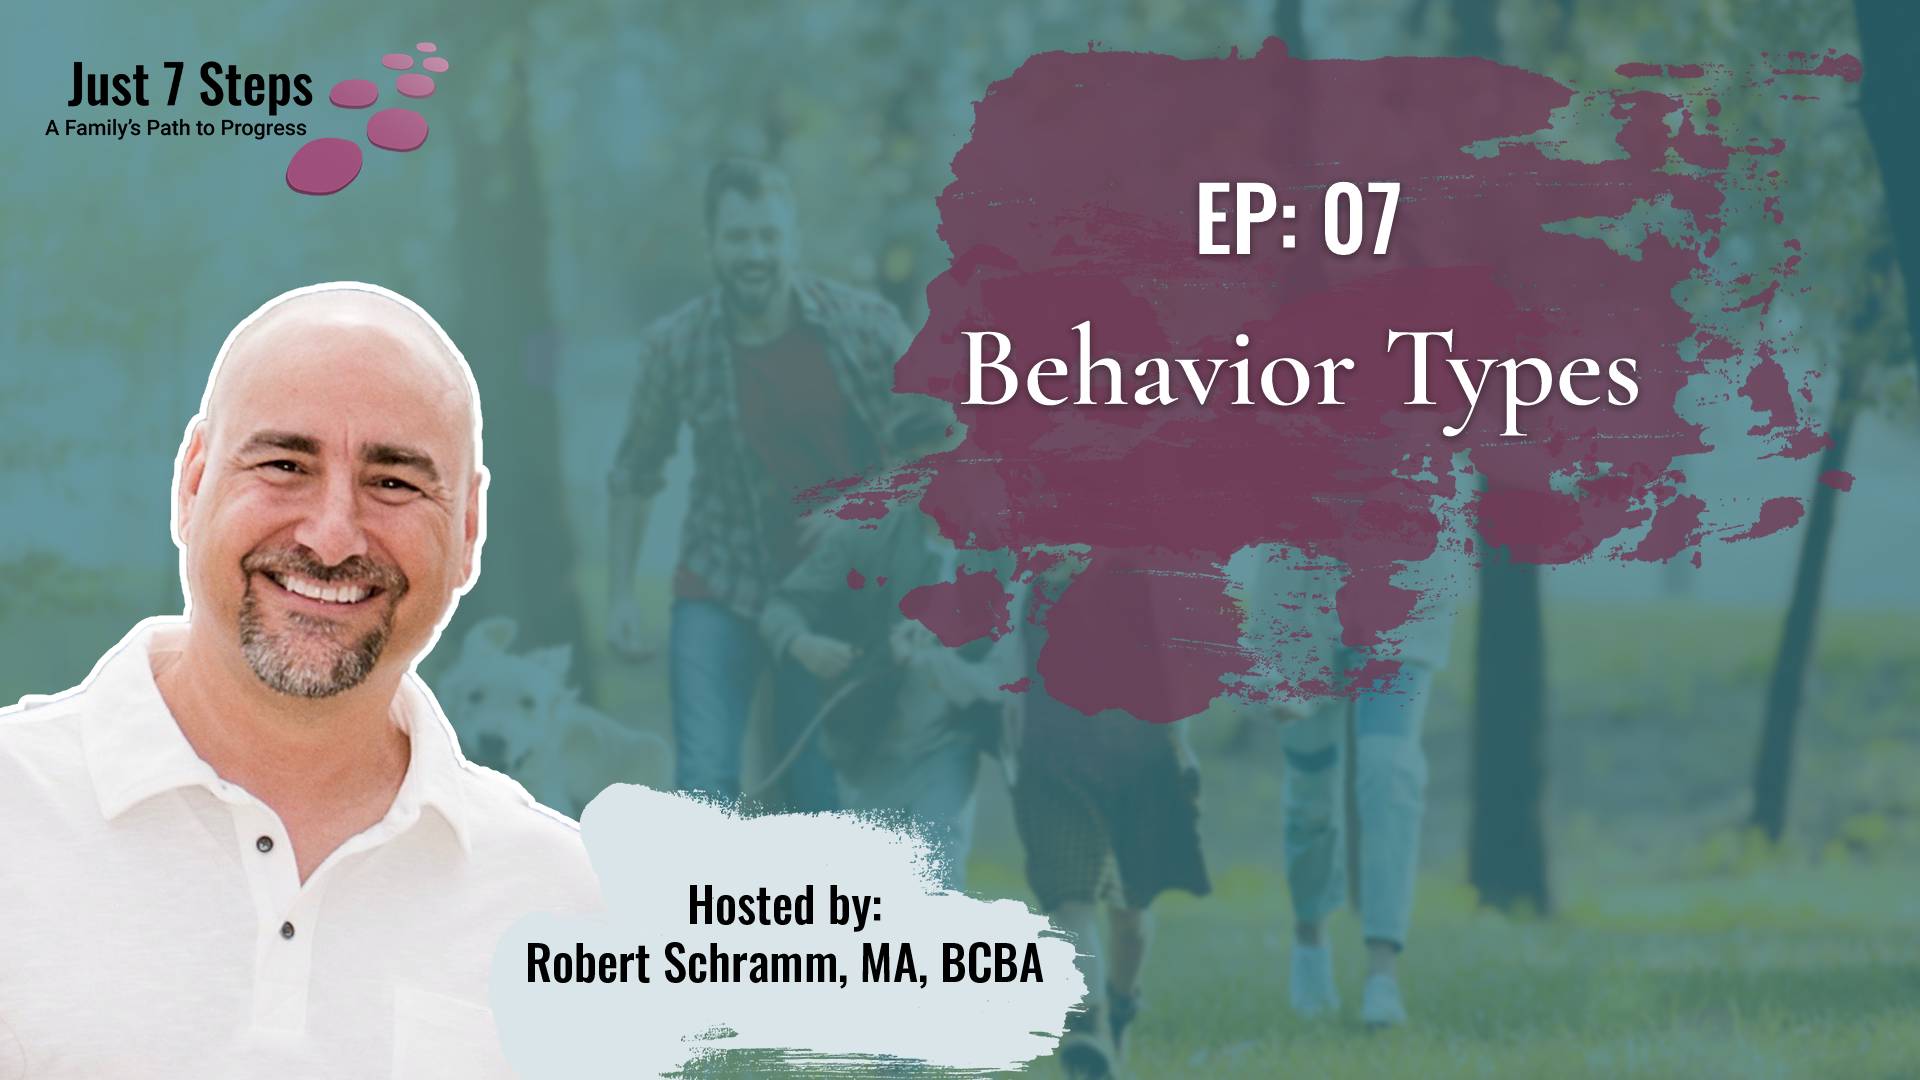 What is Your Child’s Behavior Type?